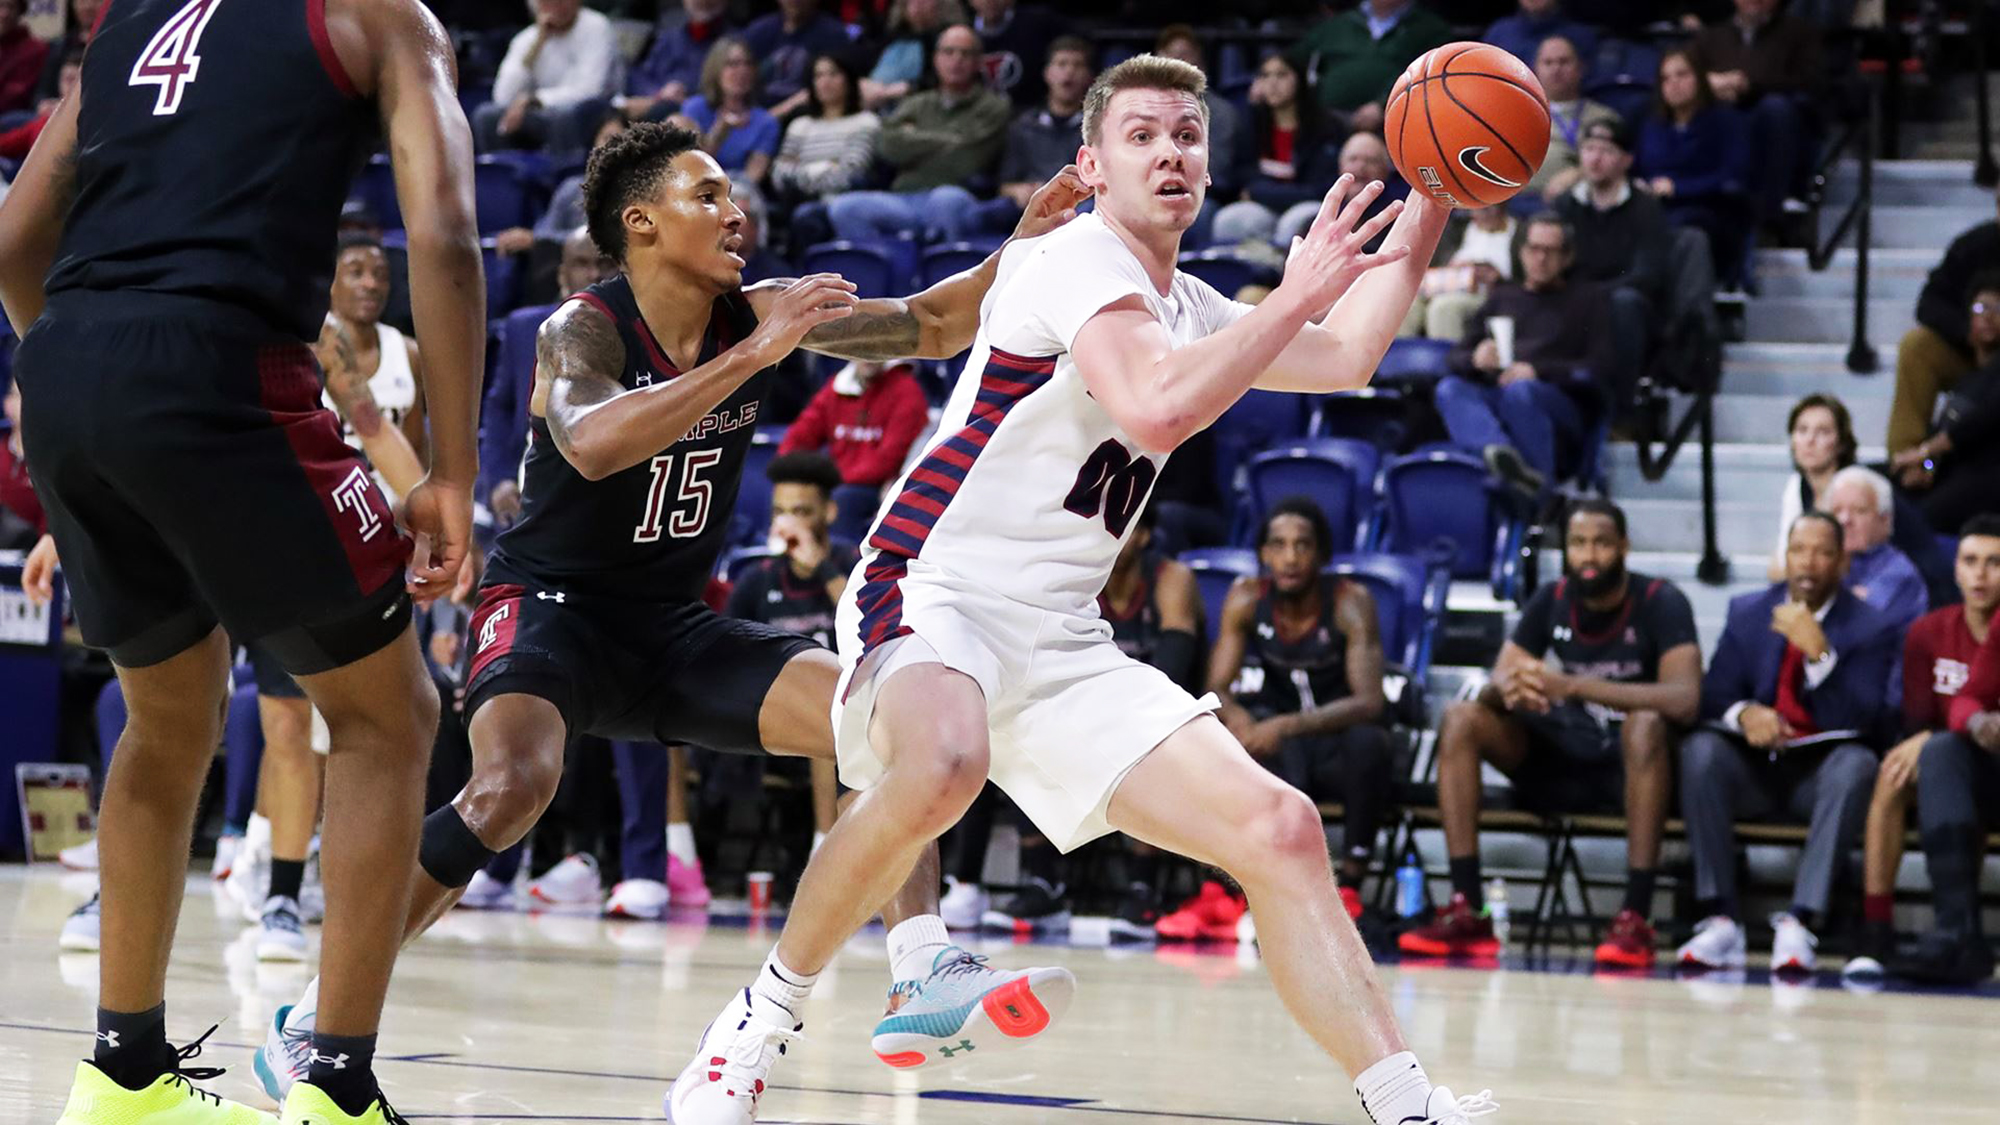 Senior guard Ryan Betley makes a move with the ball against Temple at the Palestra.